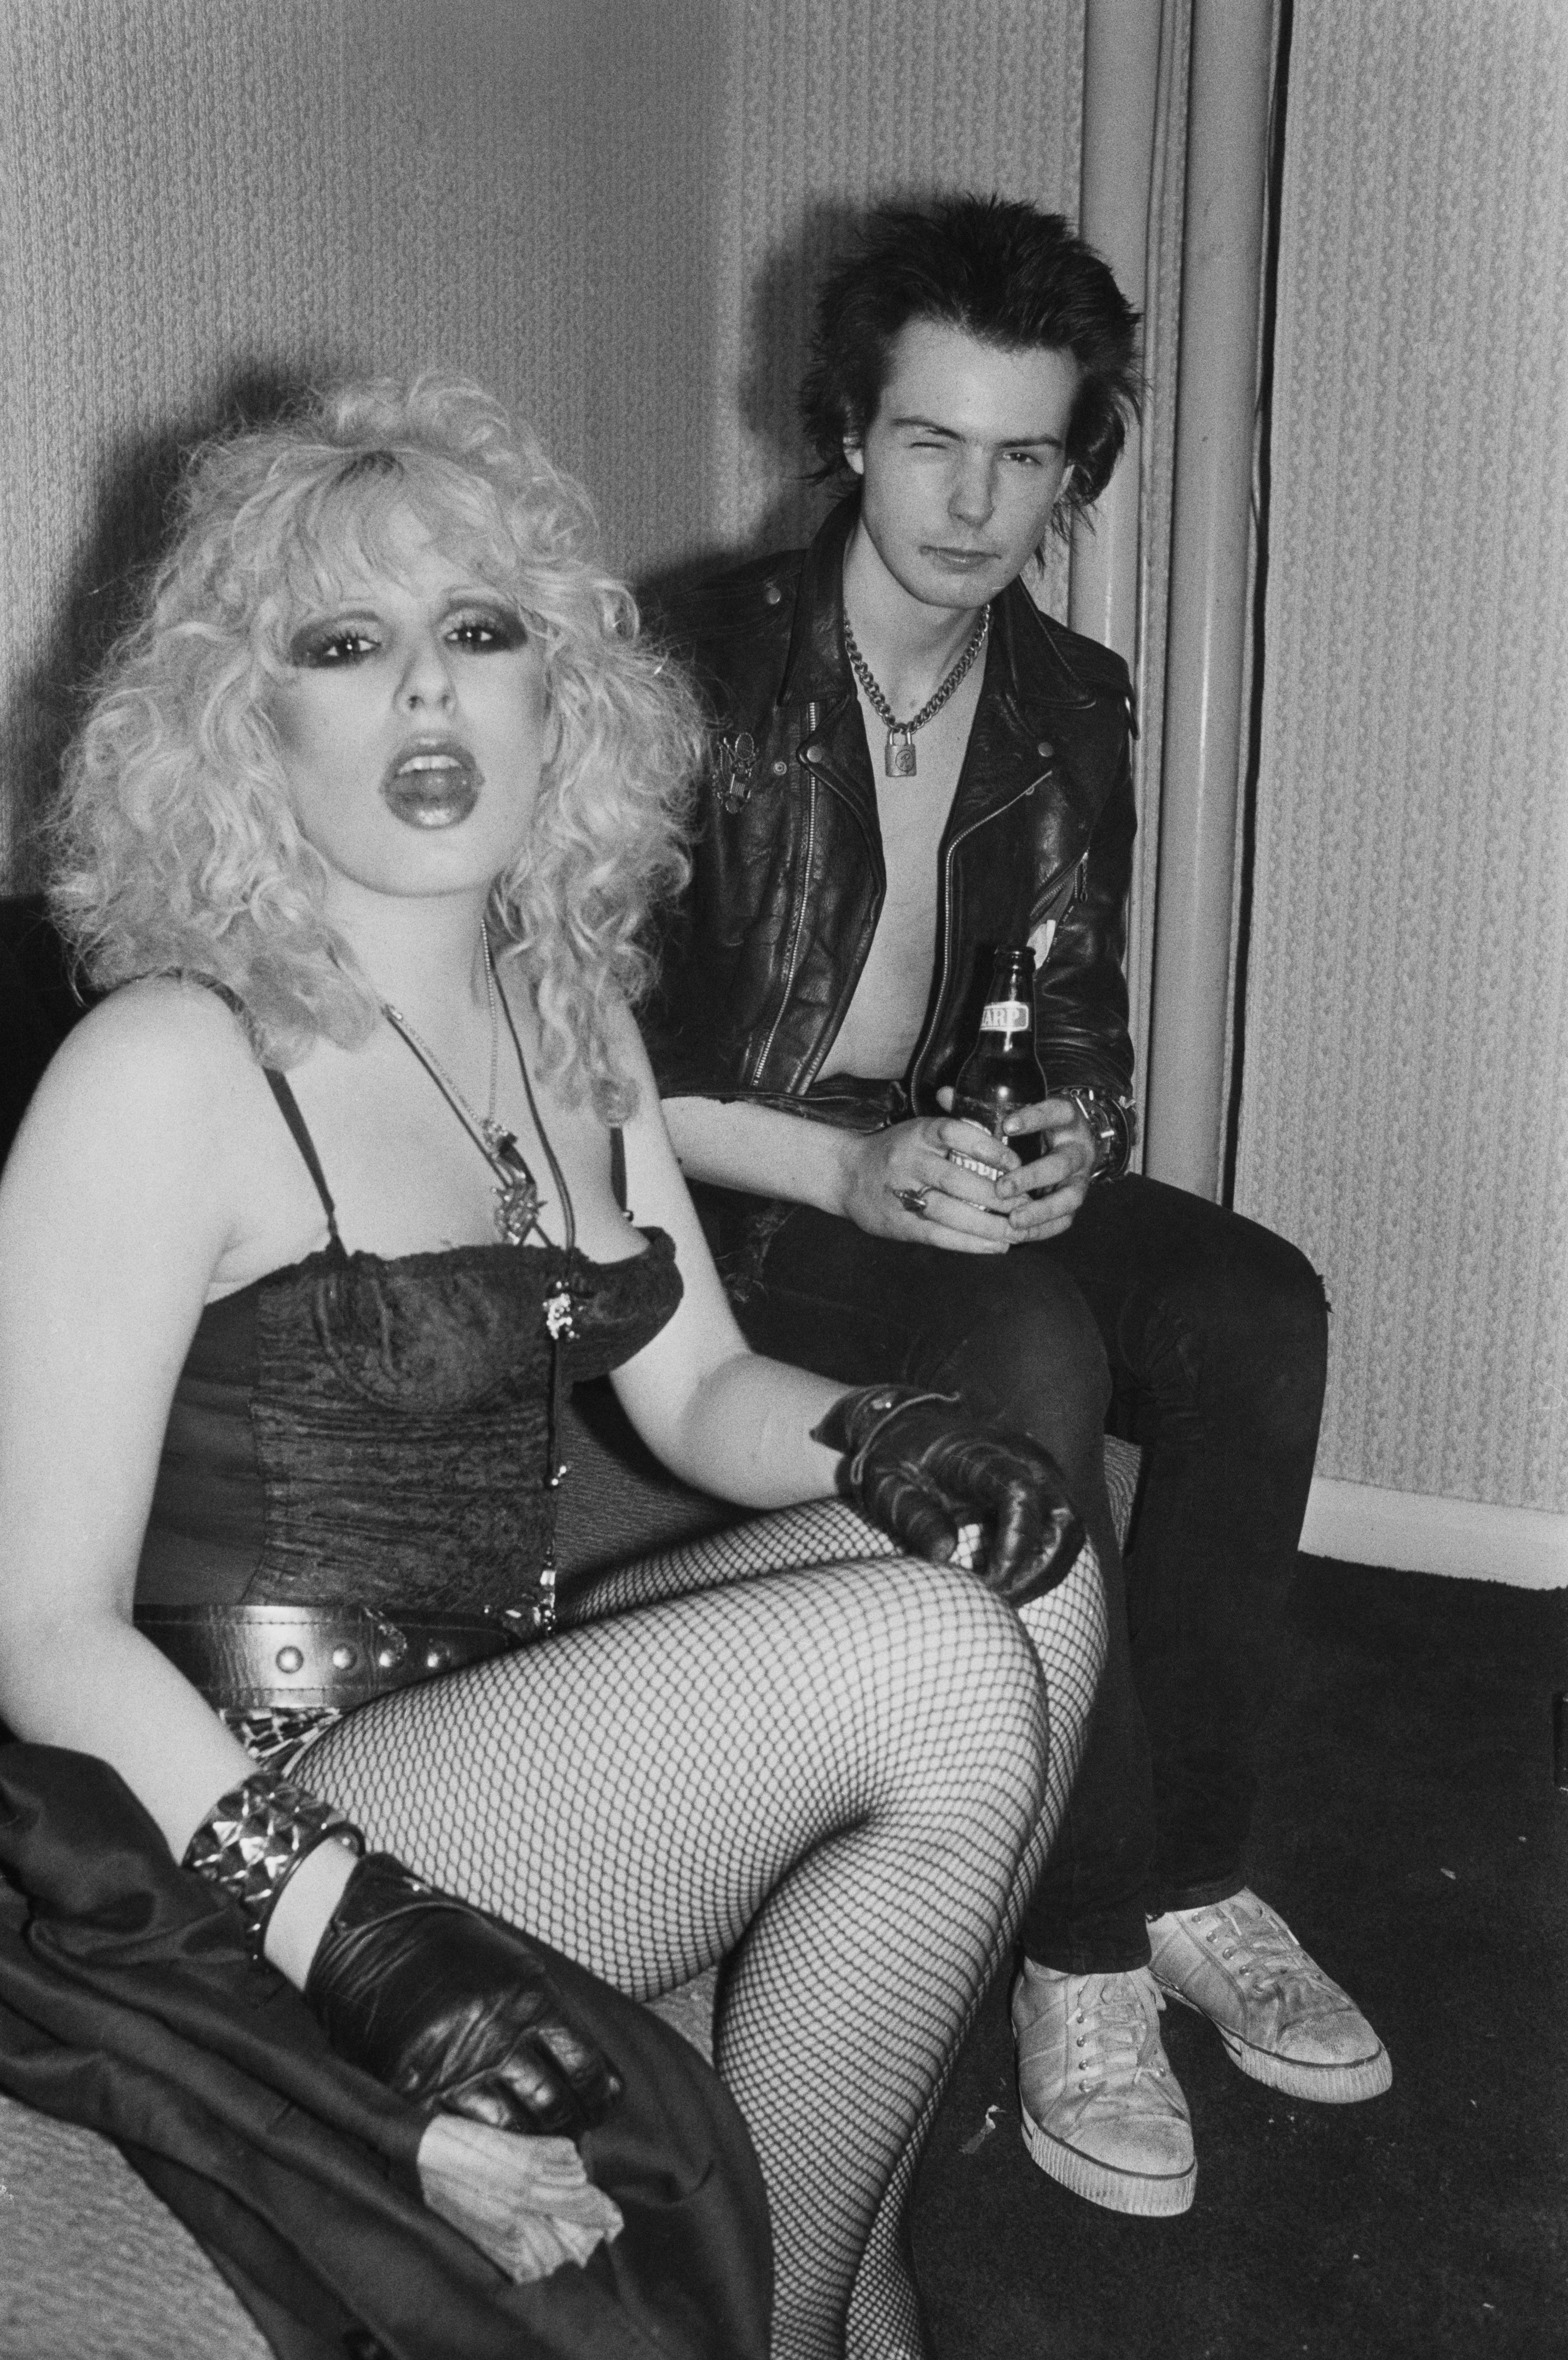 Sid Vicious later retracted his ‘confession’ admitting to murdering his girlfriend Nancy Spungen